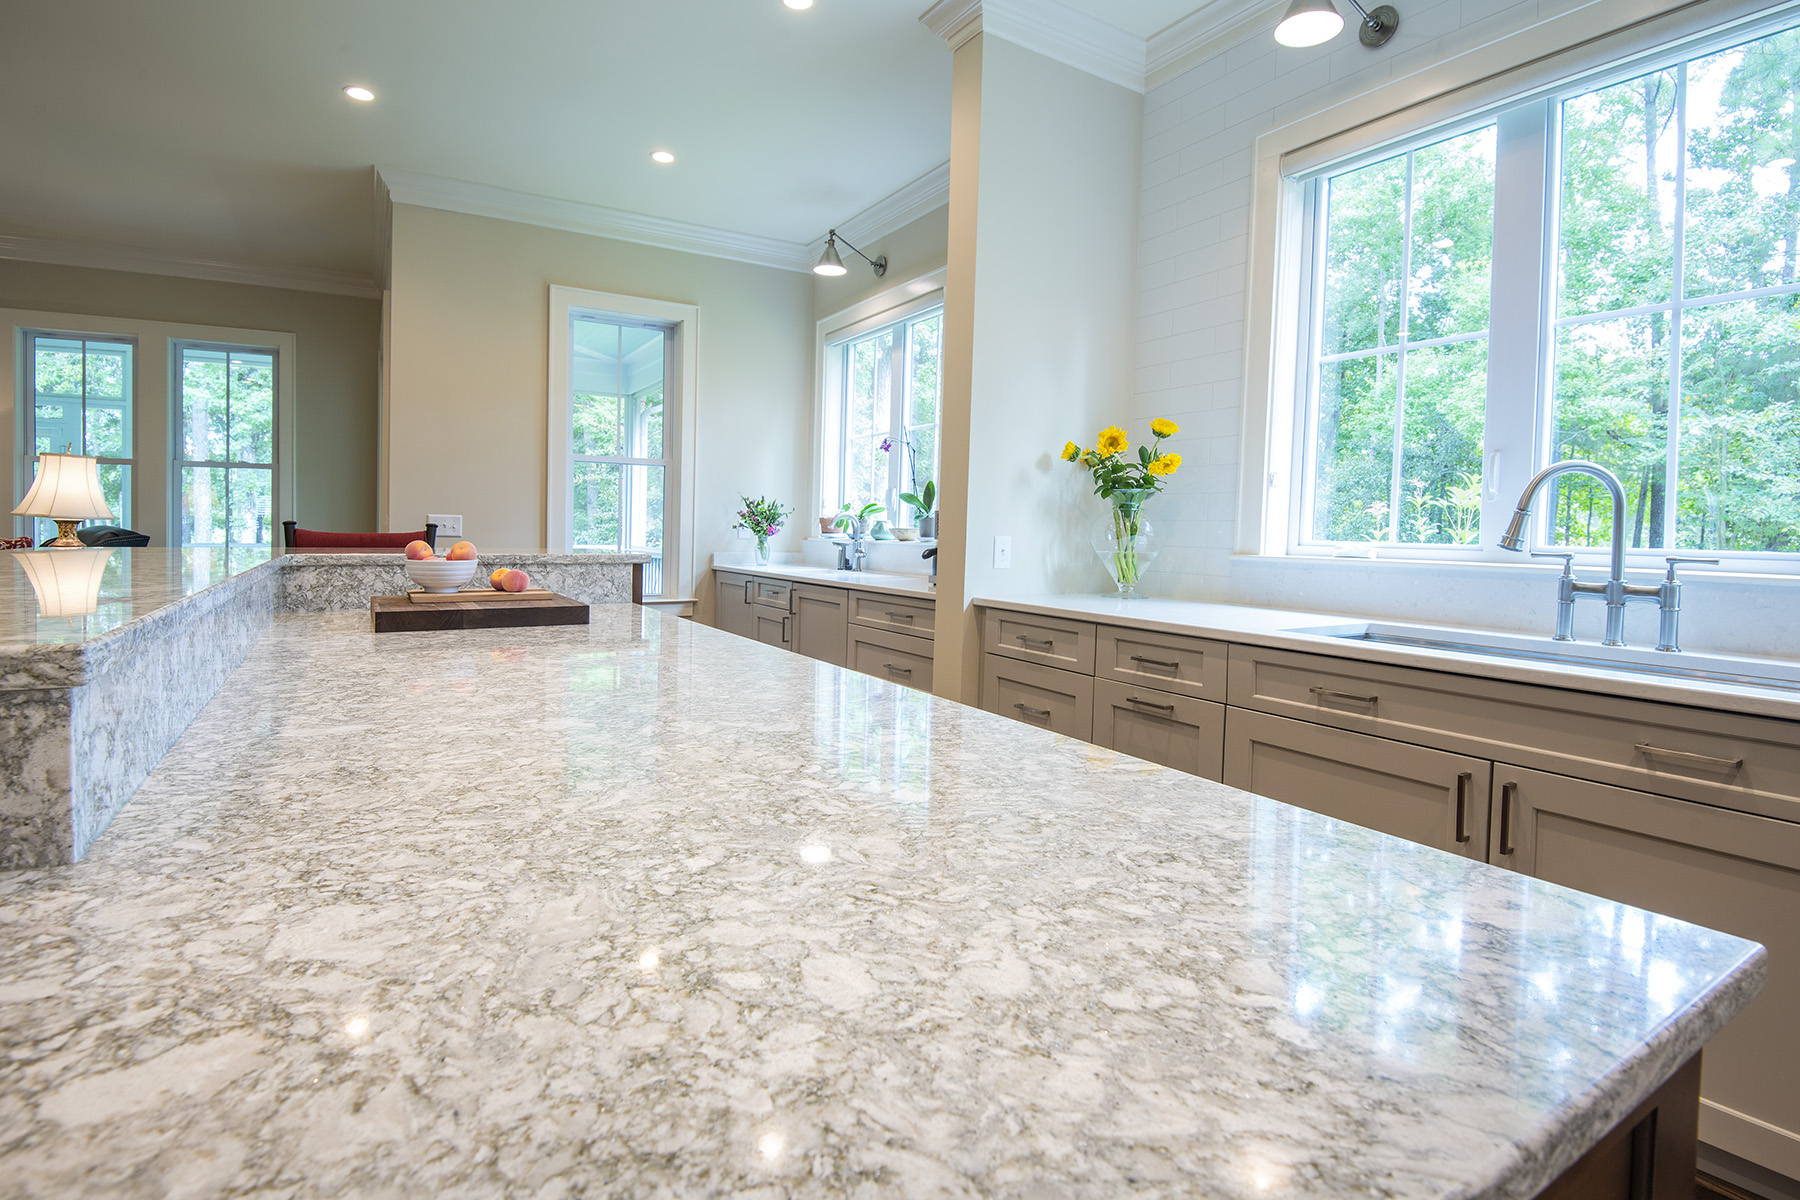 Choosing the Best Countertop Material for Your Remodel